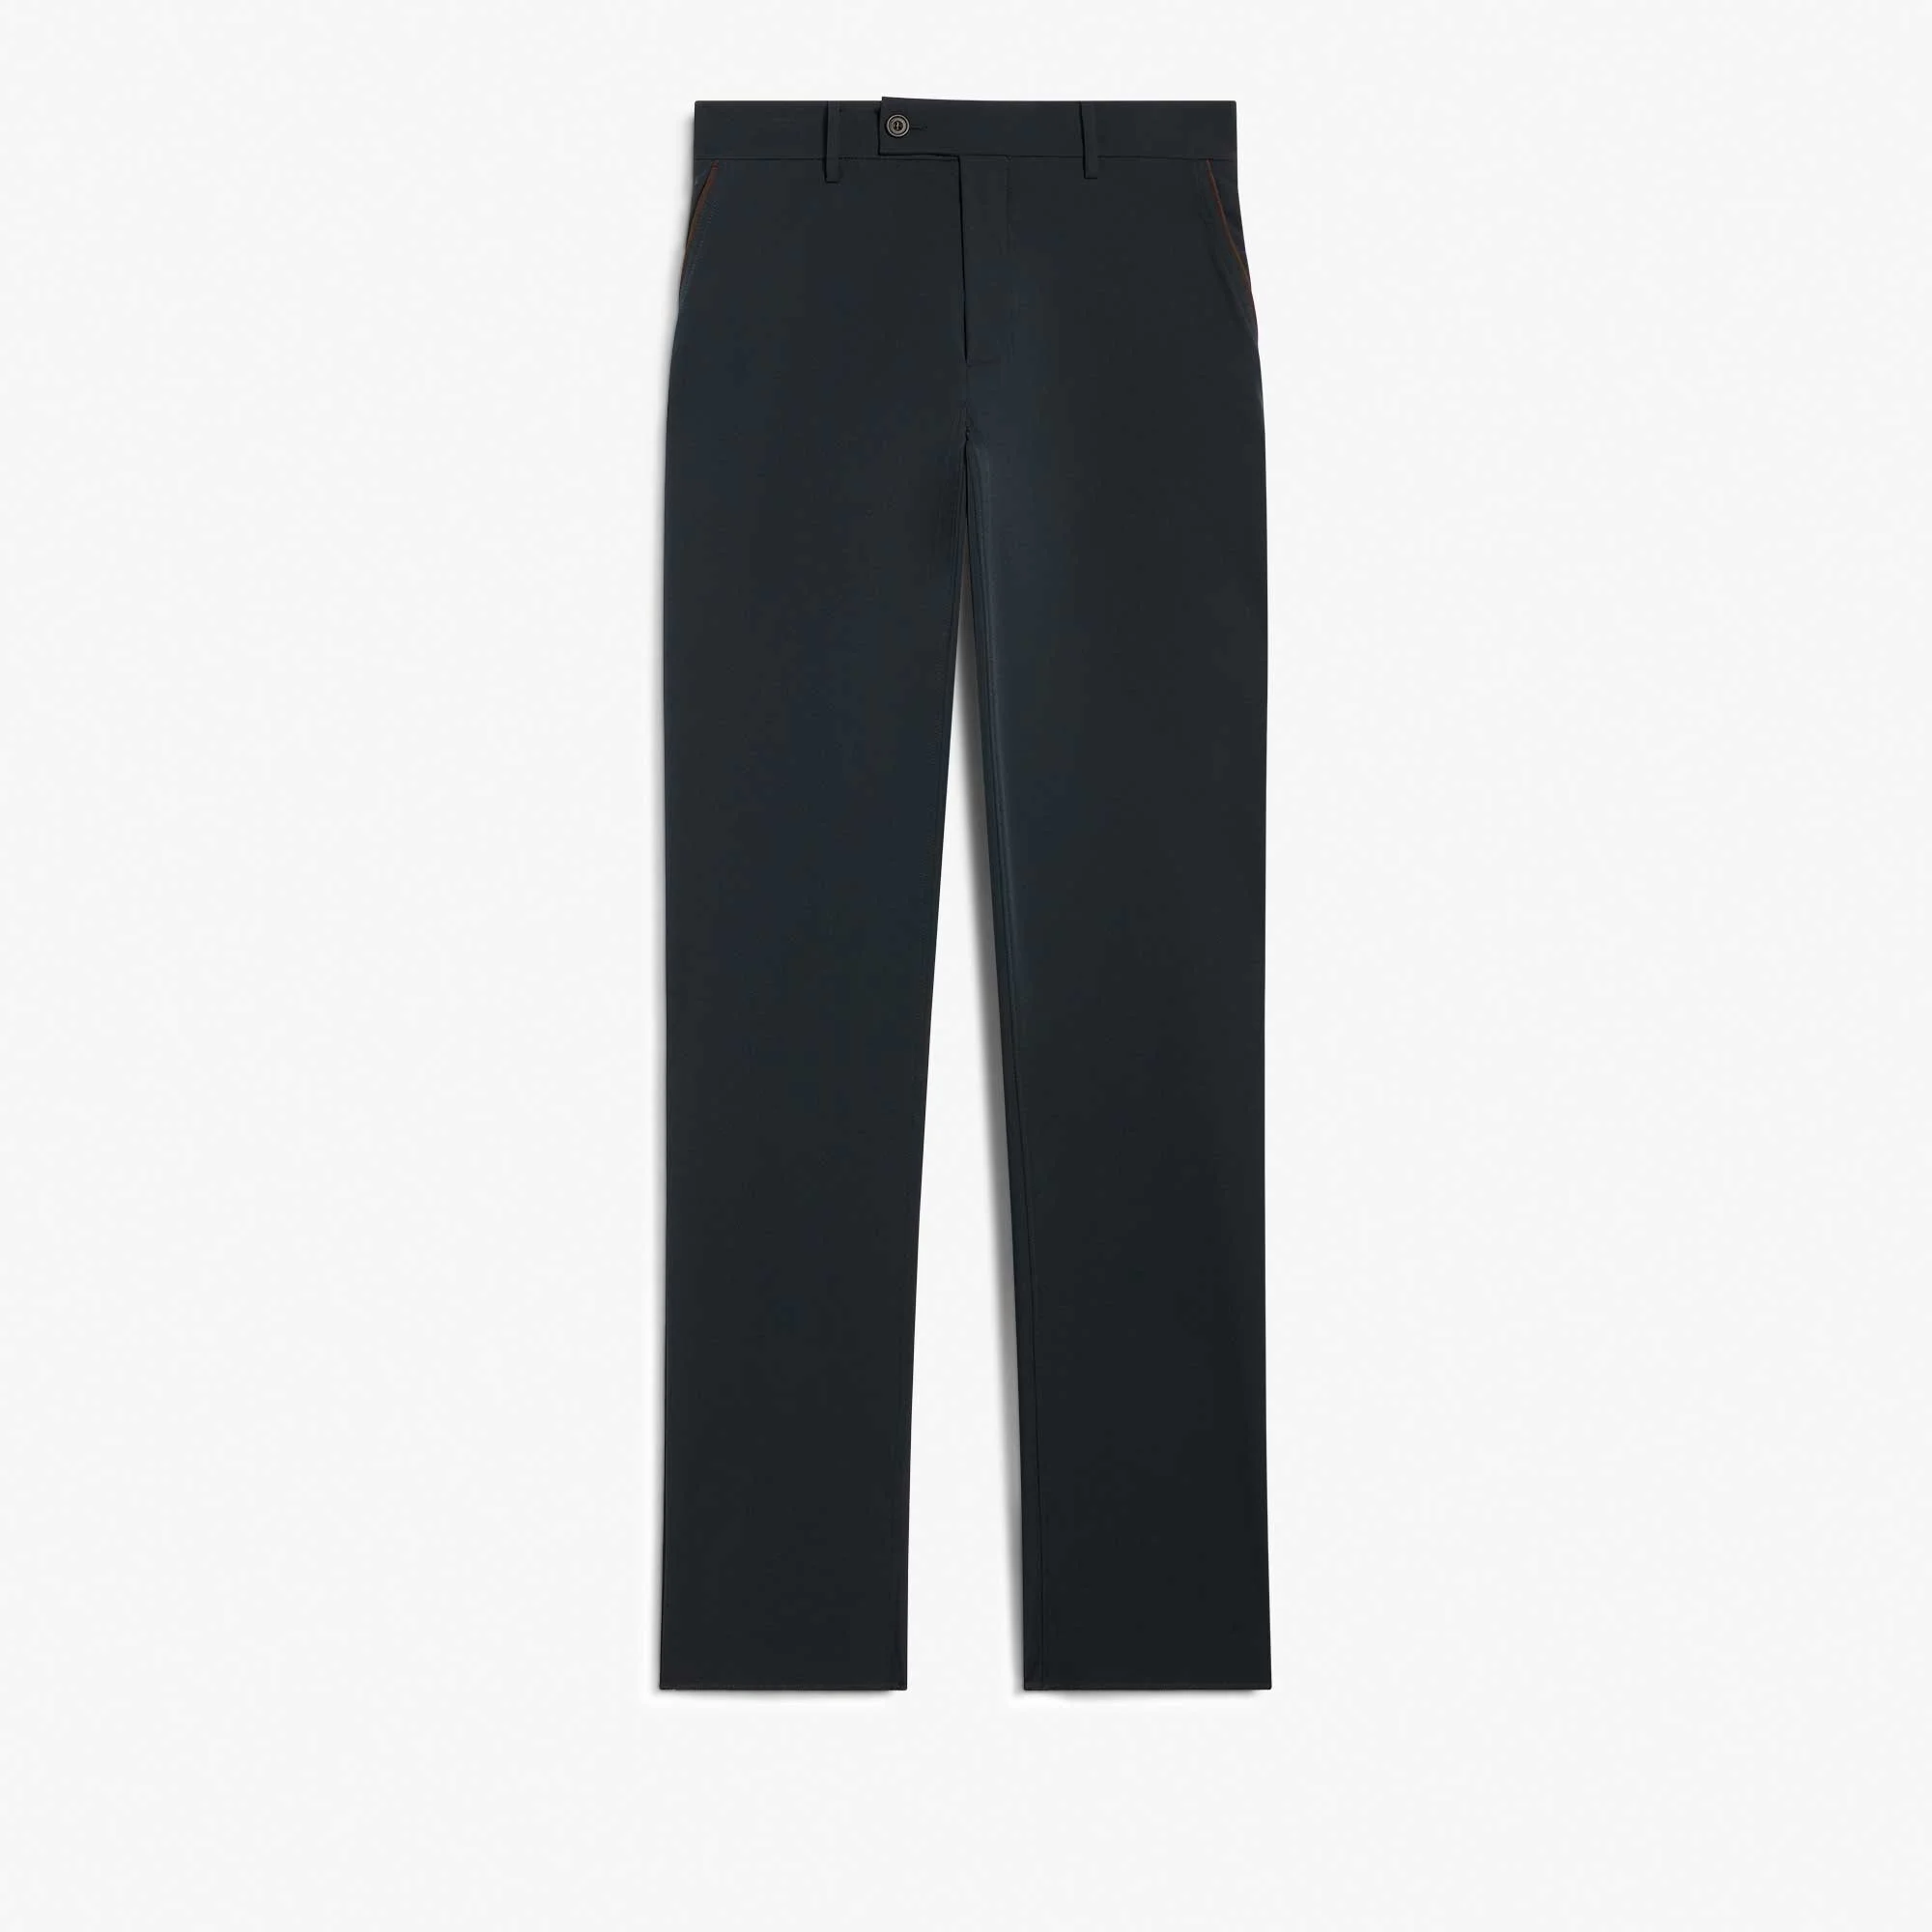 Active Technical Pants, COLD NIGHT BLUE, hi-res